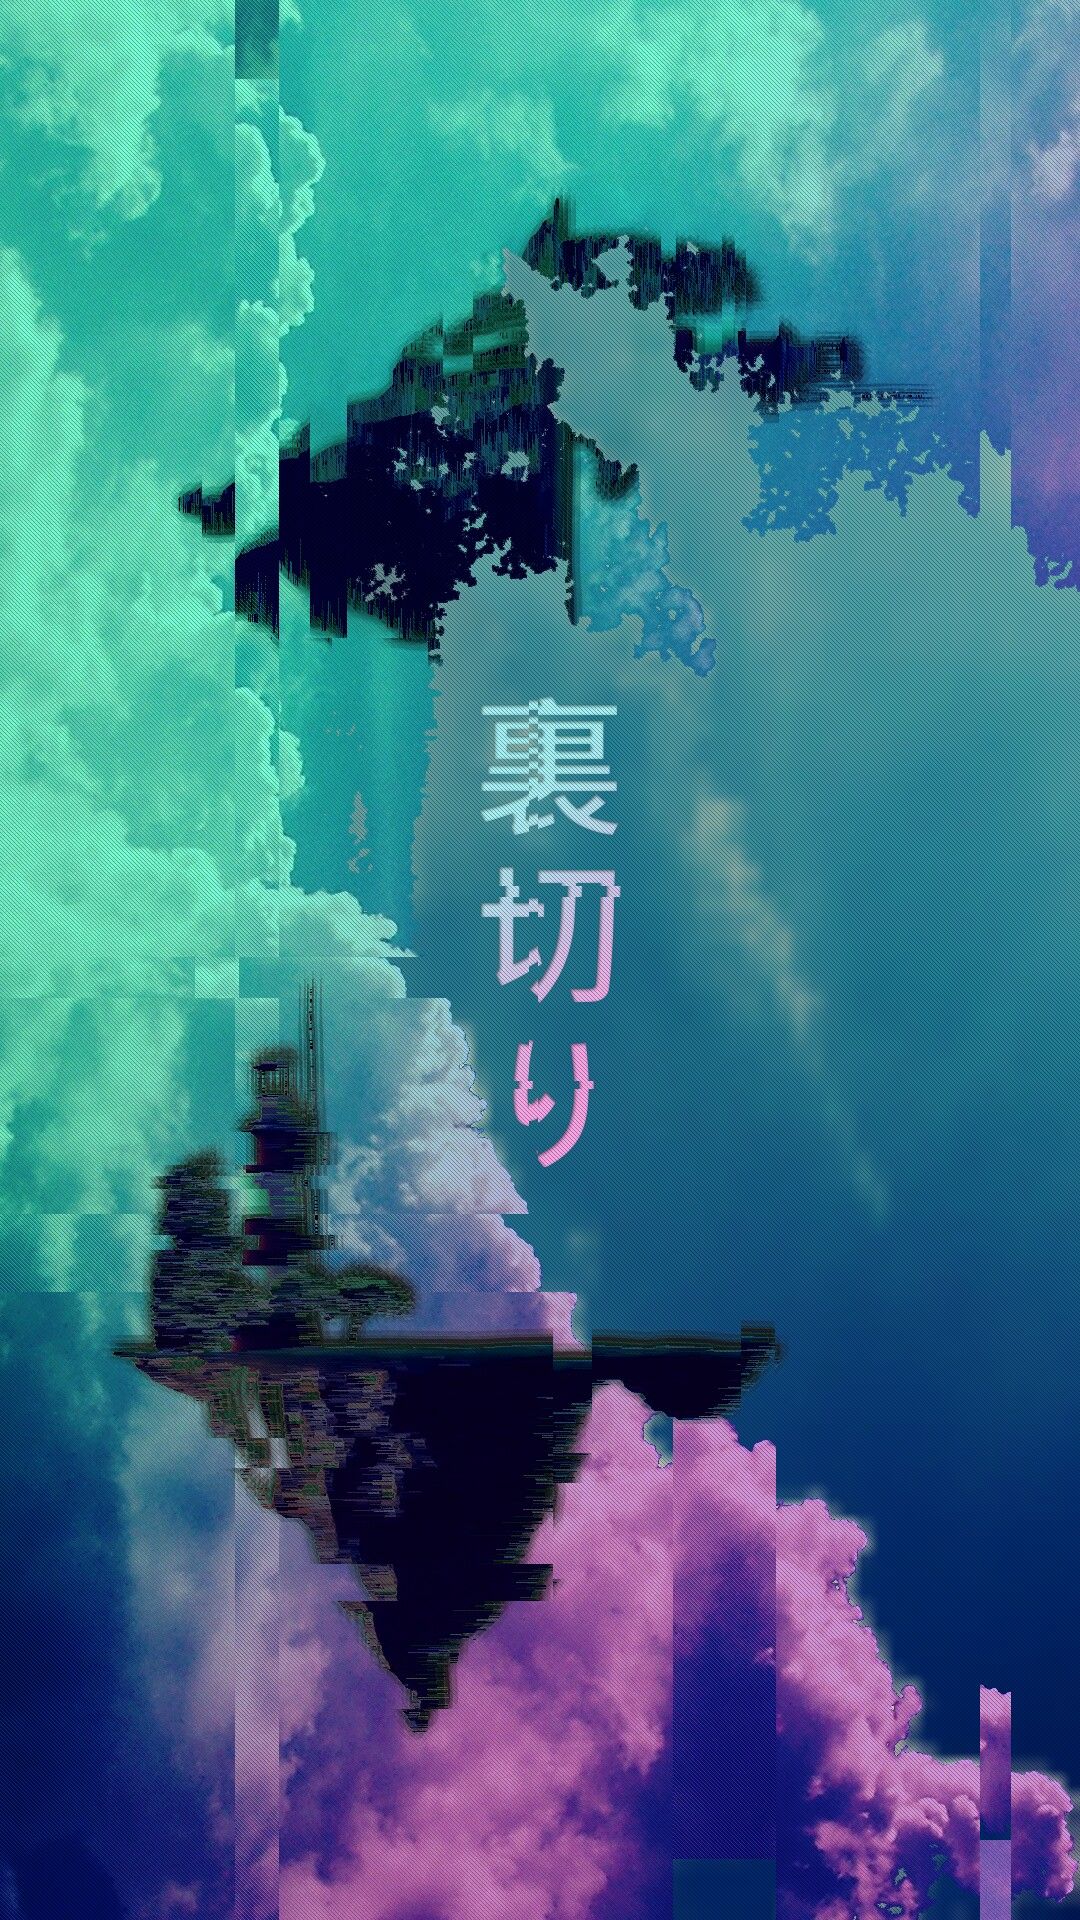 Aesthetic anime background with the ship flying in the sky - IPad, lo fi, cool, Japan, Japanese, art